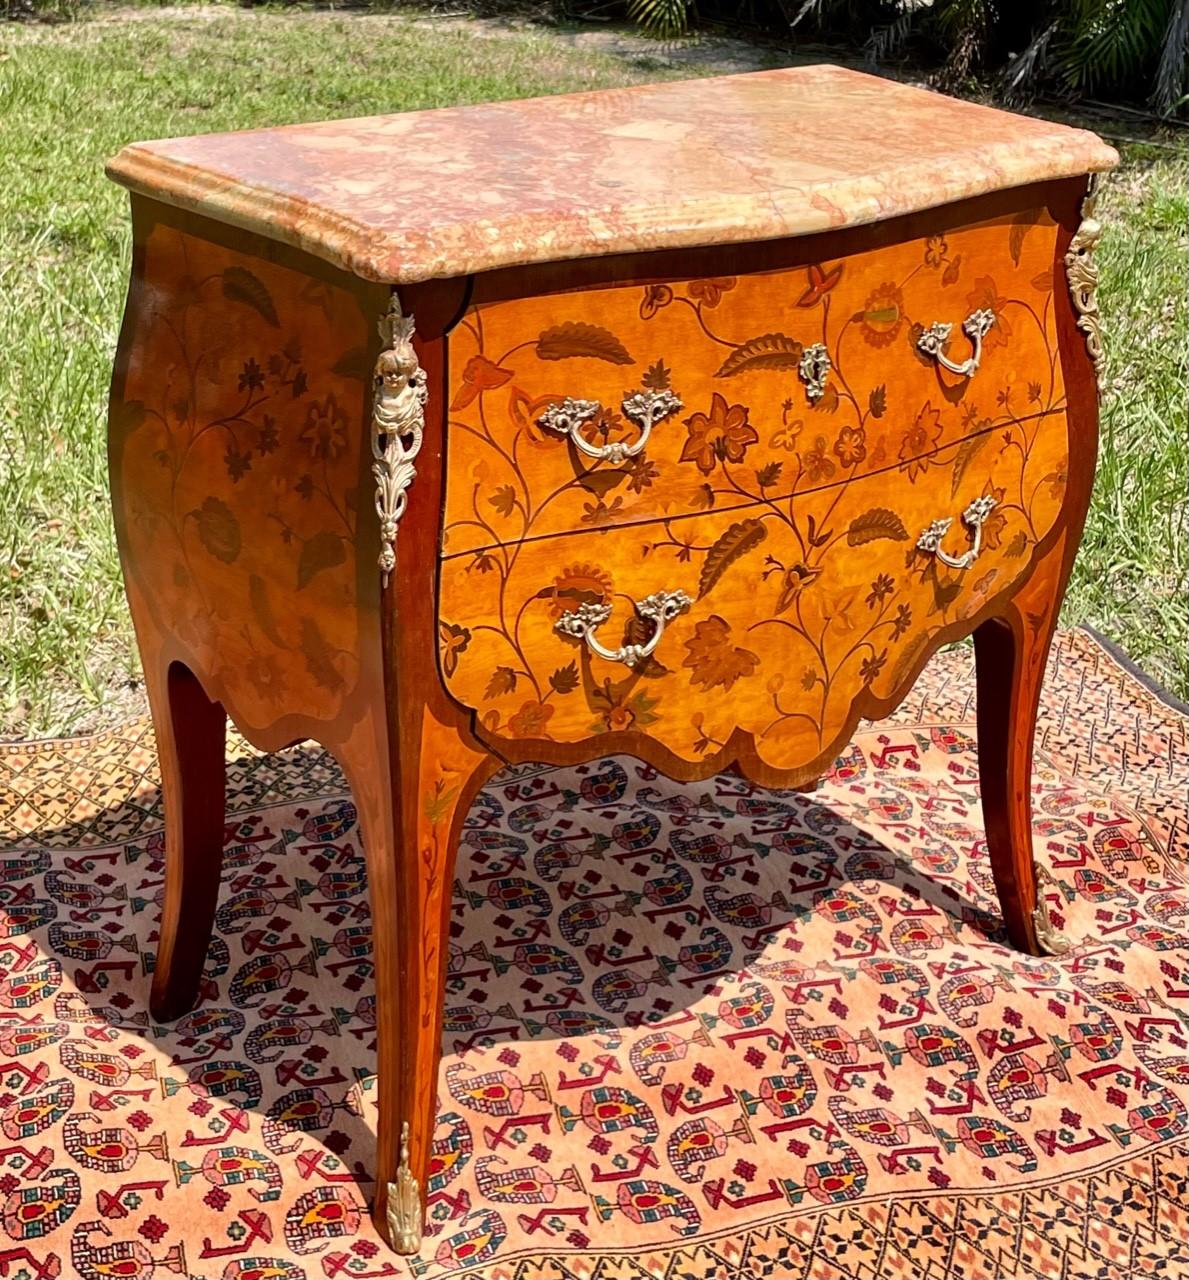 Louis XV style gilt bronze mounted tulipwood marquetry bombe commode. Late 19th century.

Elegant French two drawer marquetry commode. The rectangular pastel marble top sits above two drawers. The commode is veneered with floral marquetry. The